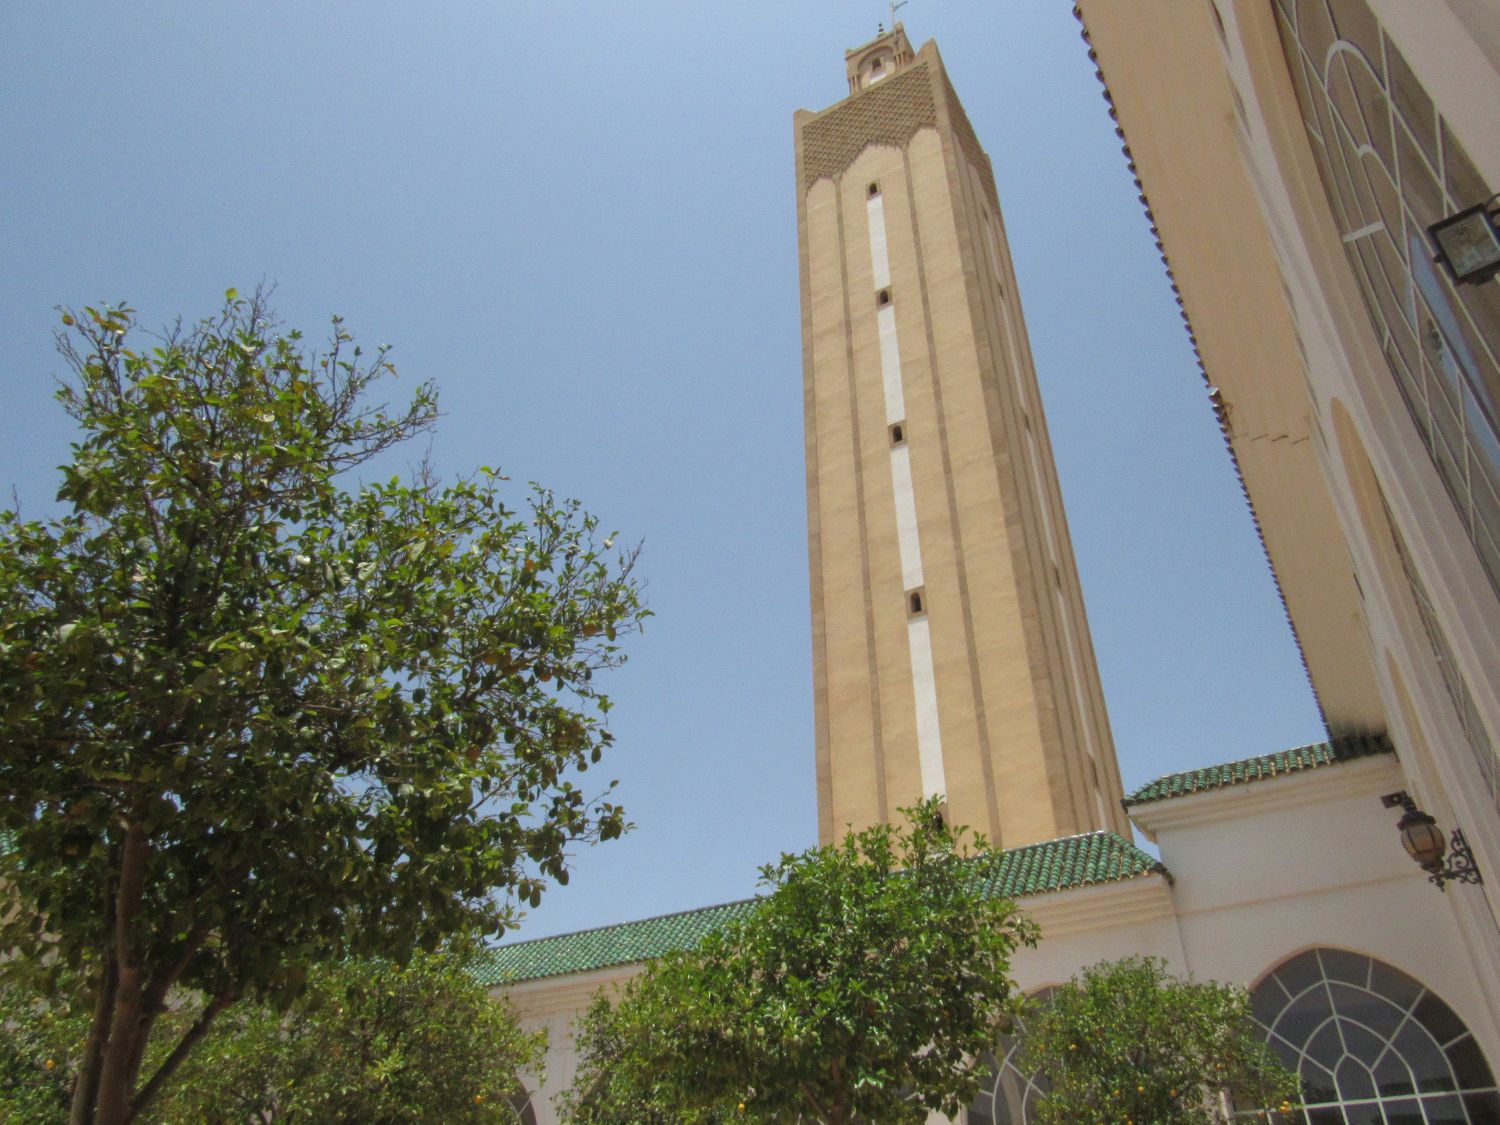 Upward view from the courtyard to the minaret